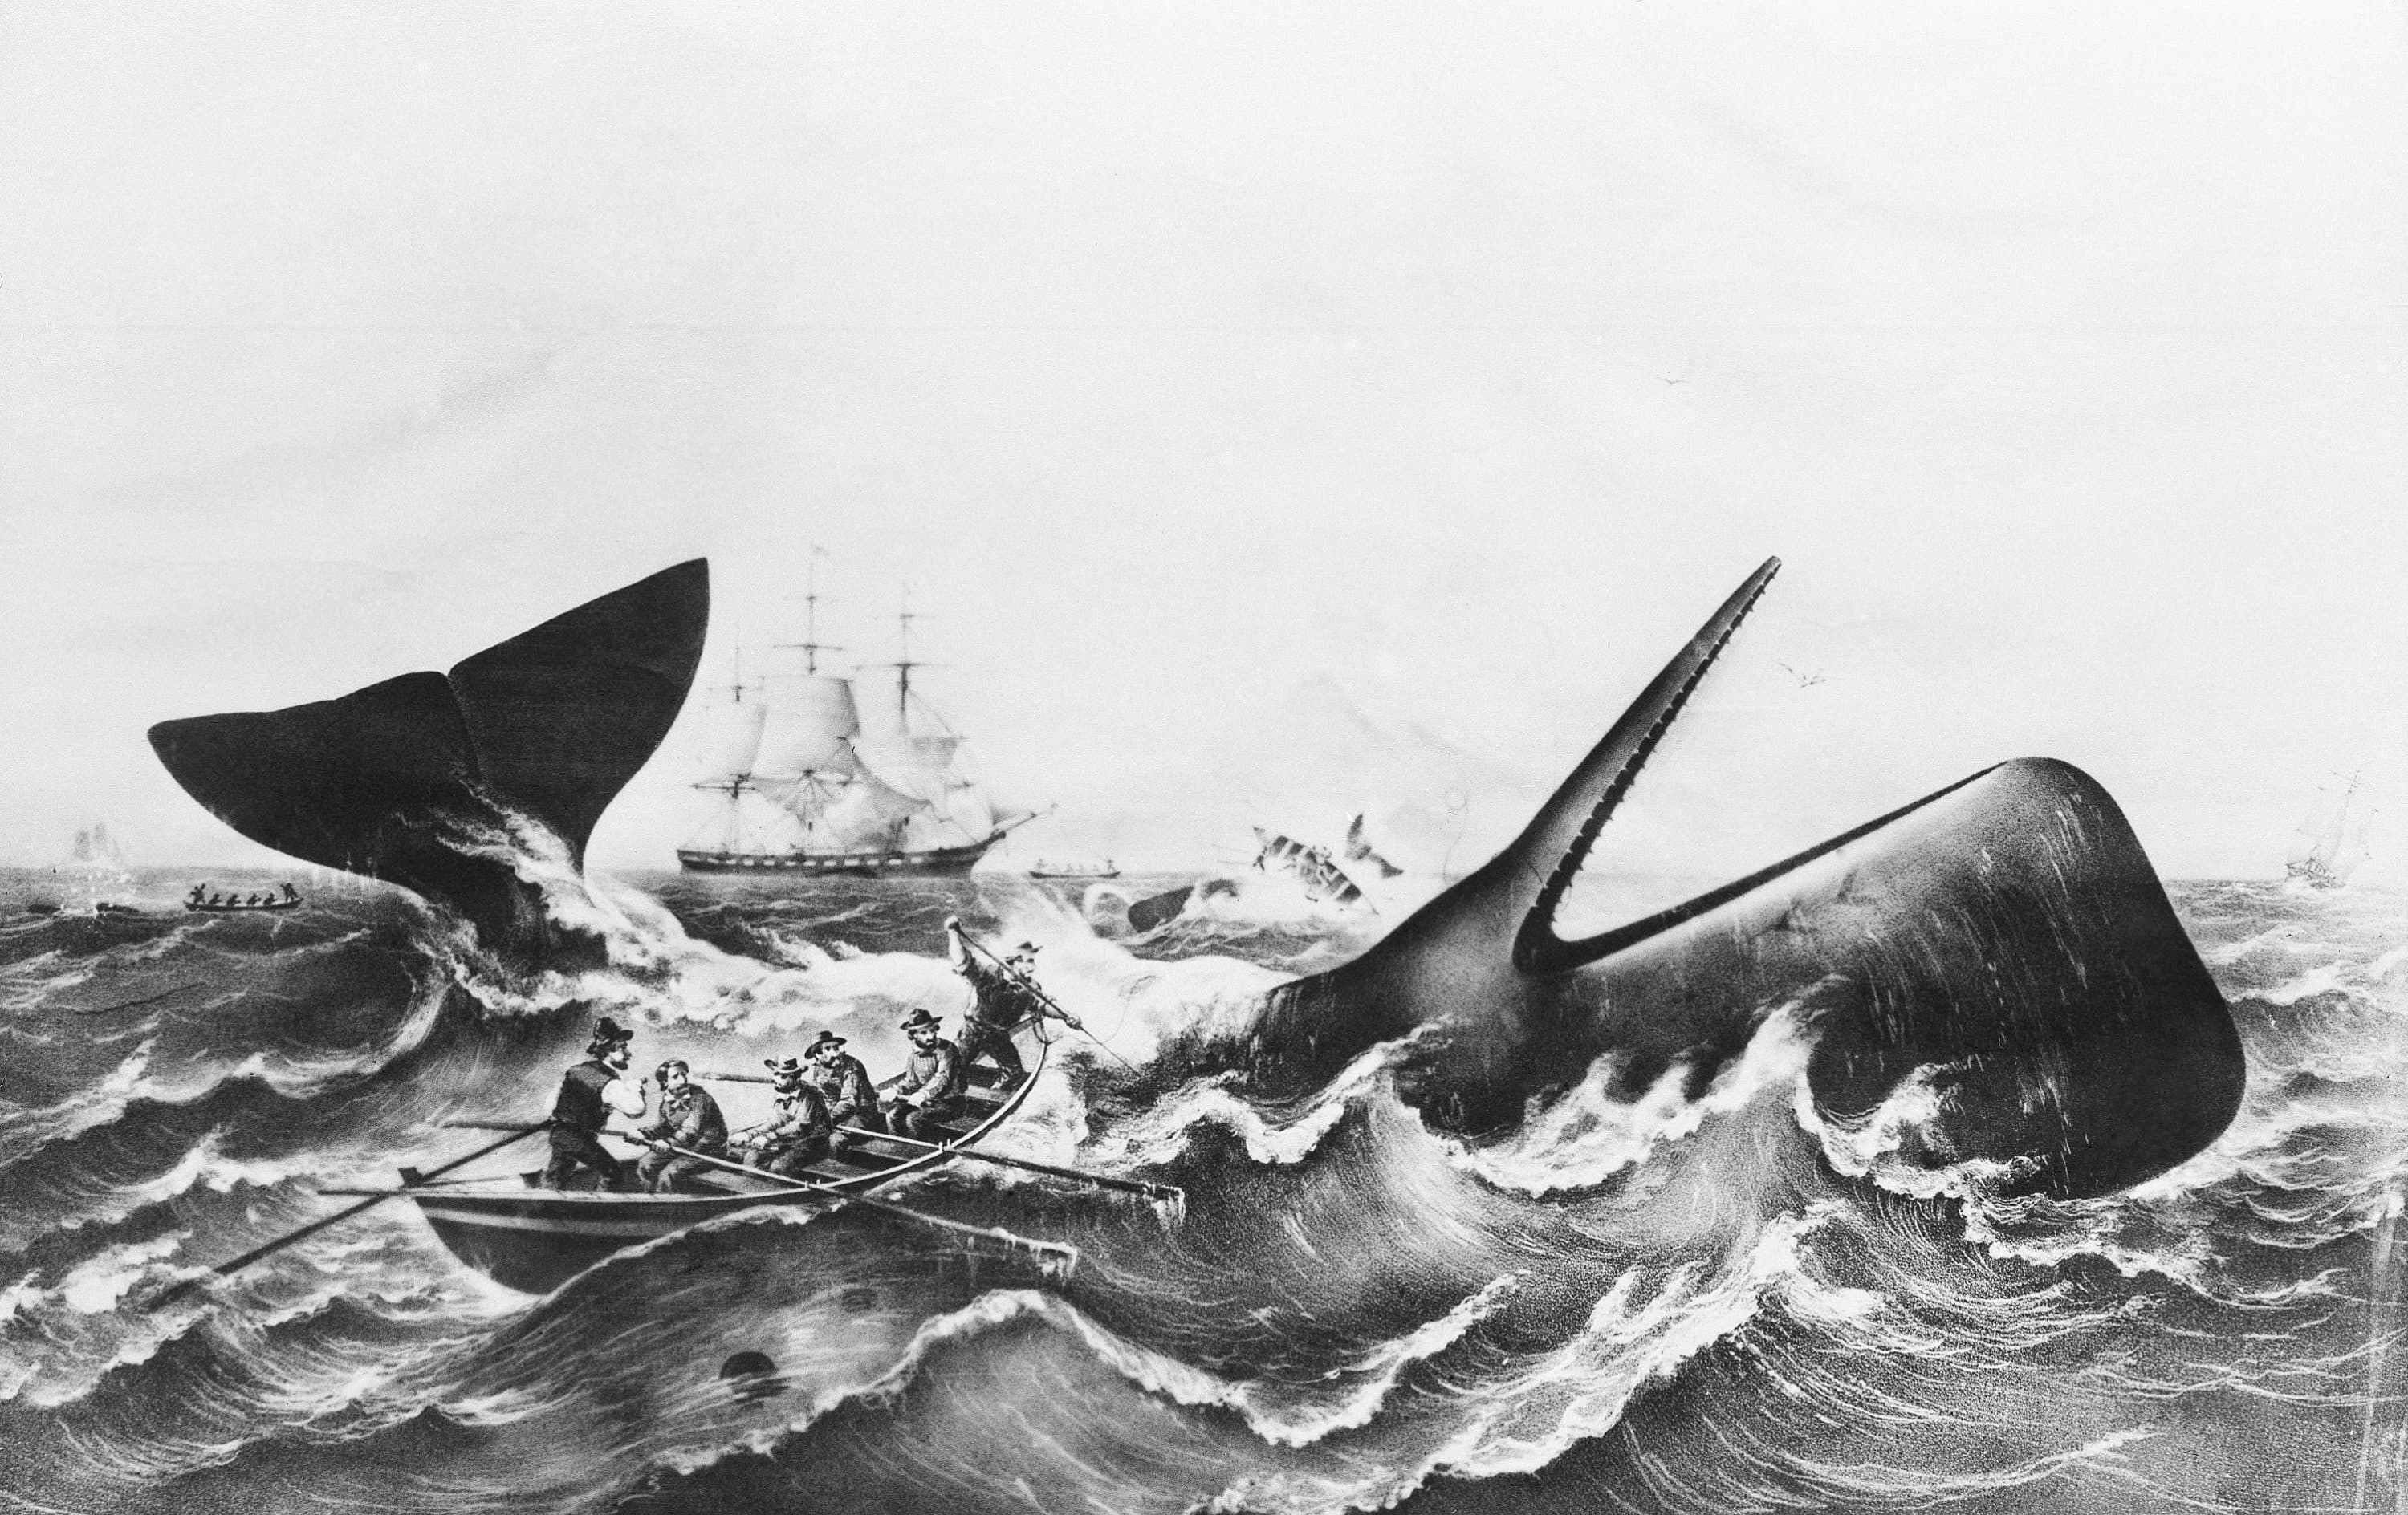 A famous old whaling print, circa 1850, showing mate attempting to lance and kill a threashing sperm whale. In background other whales toss frail lifeboats into the air. The whale is on his back, showing distinctive square shape of the sperm. This copied from files of the old Dartmouth Historical Society and Whaling Museum, Johnnycake Hill, New Bedford, Massachusetts. (AP Photo)